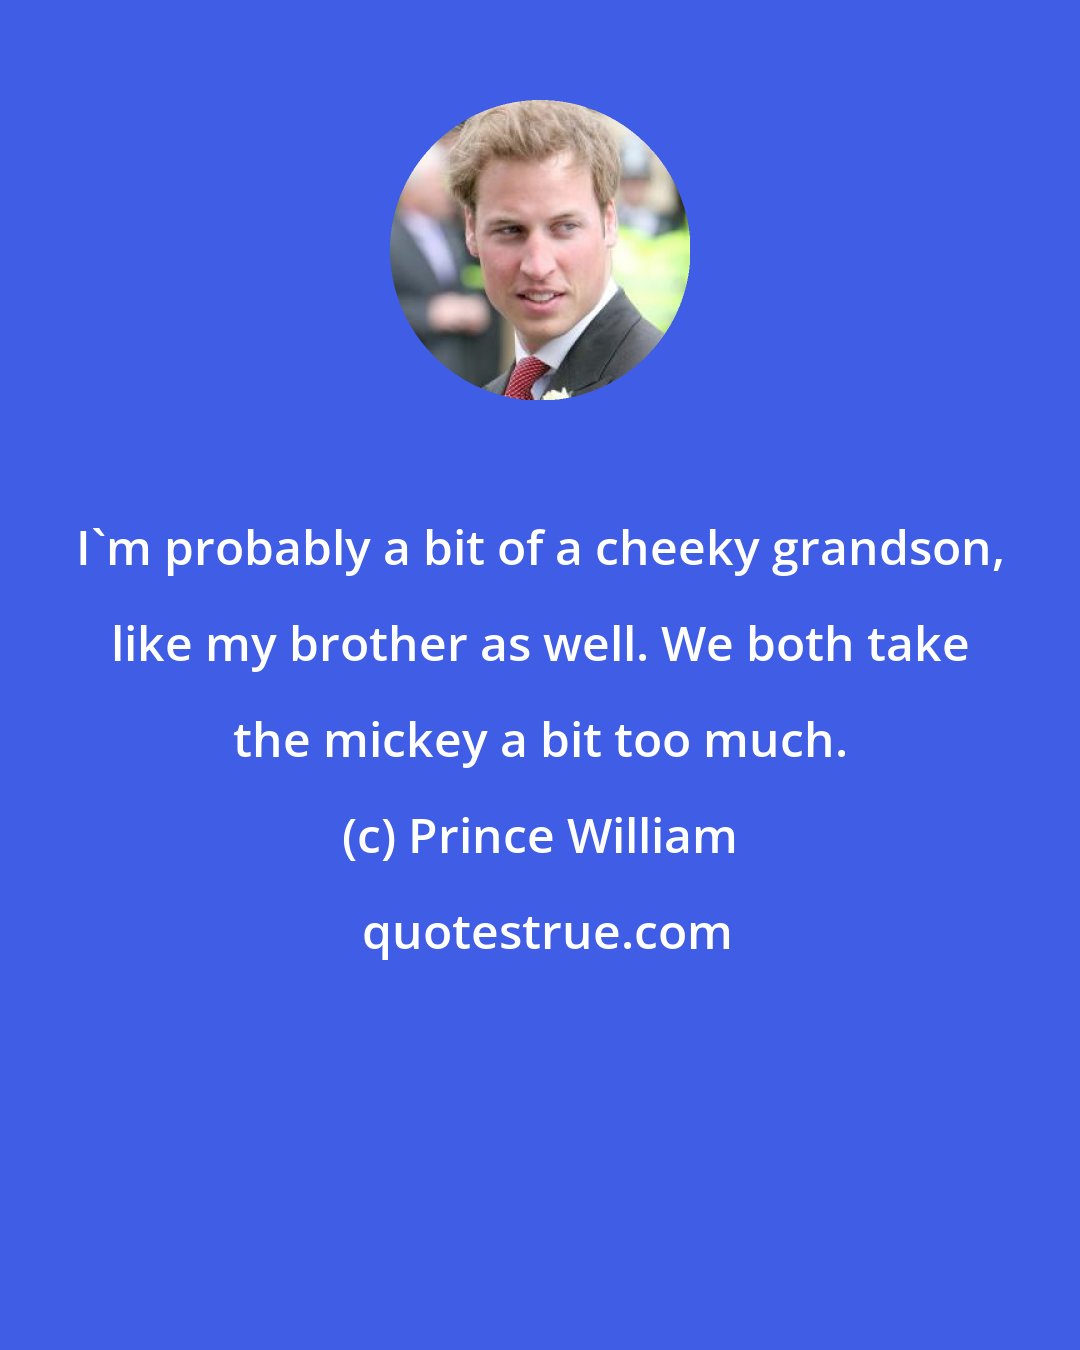 Prince William: I'm probably a bit of a cheeky grandson, like my brother as well. We both take the mickey a bit too much.